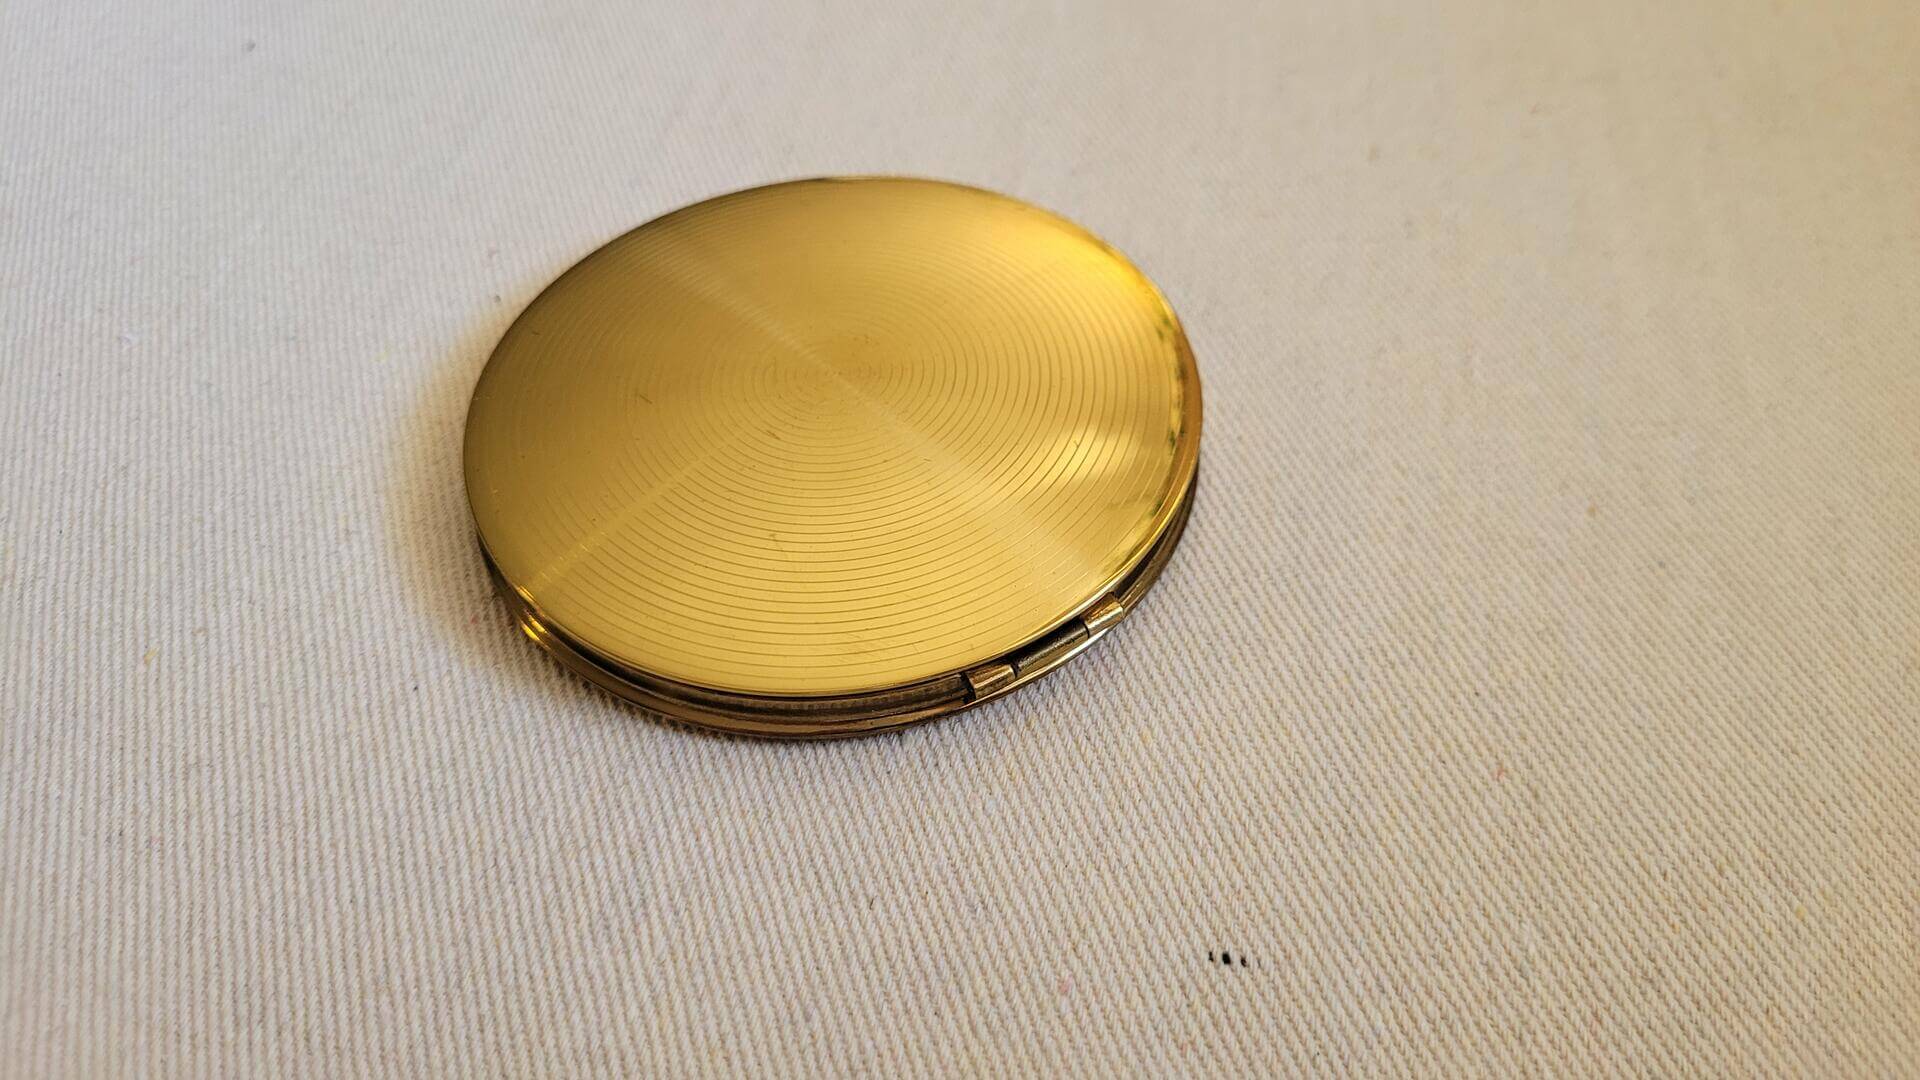 pygmalion-powder-compact-queen-elizabeth-brass-rare-vintage-made-in-england-mcm-compact-vanity-fashion-cosmetics-collectible-back